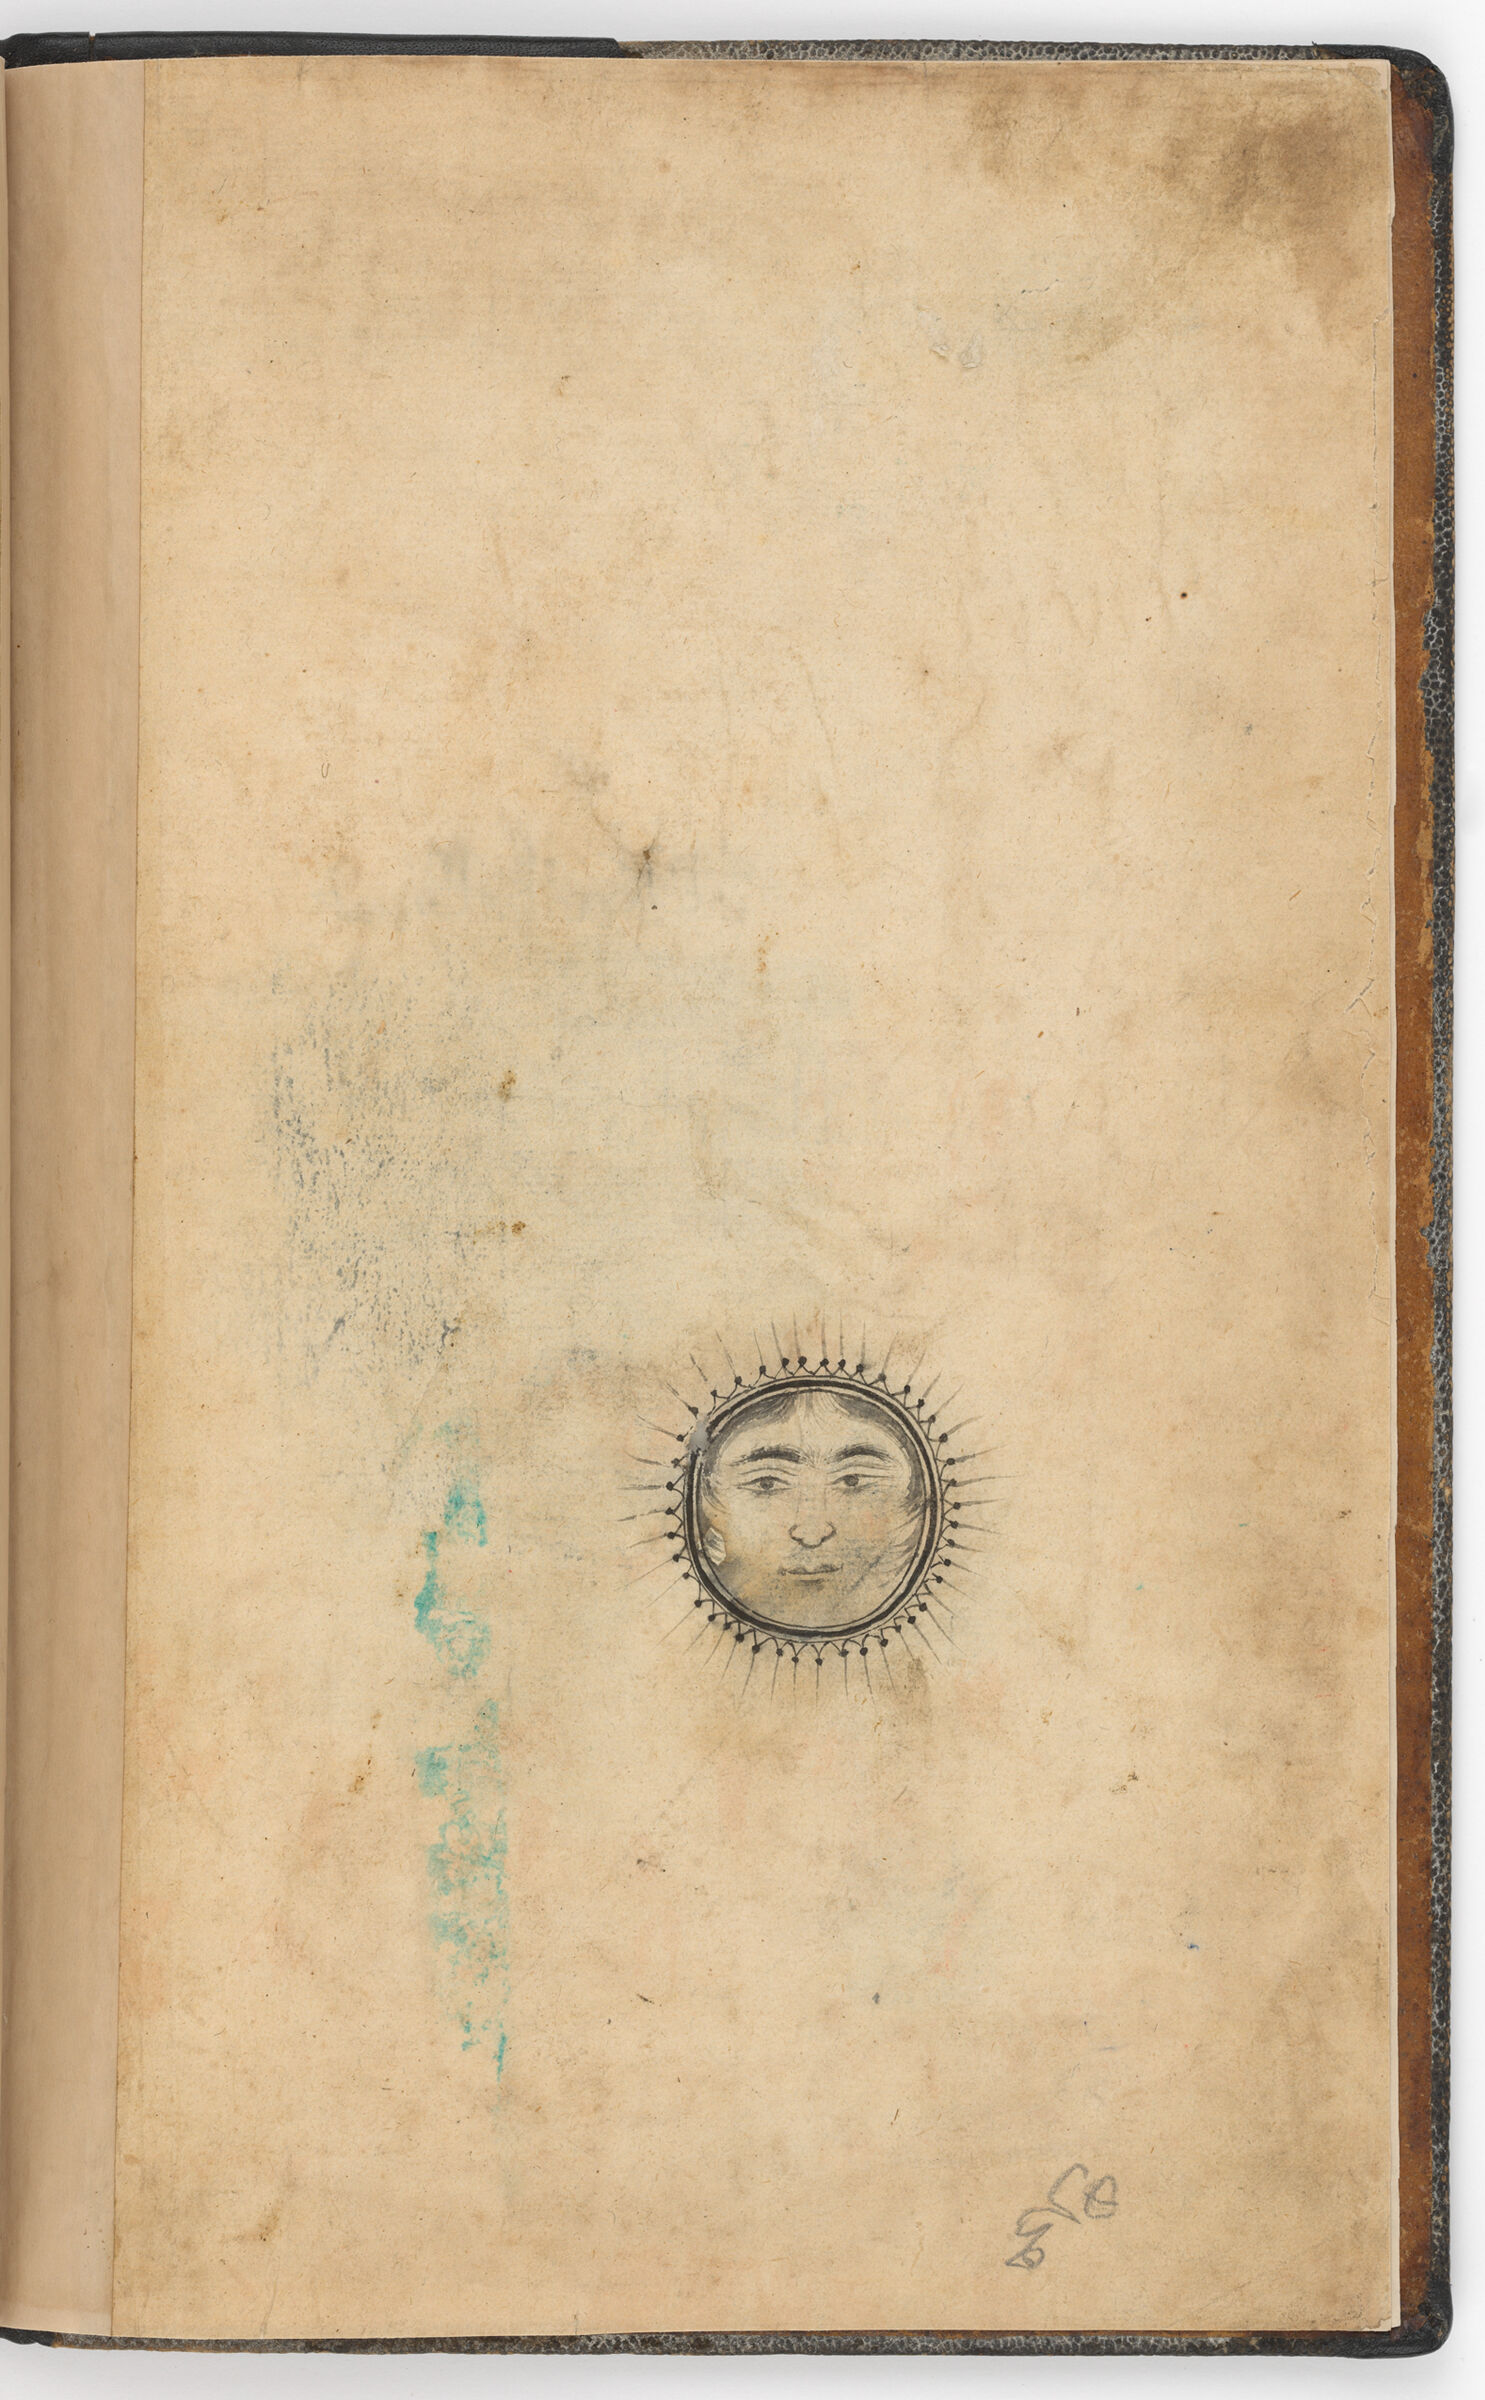 Flyleaf With A Drawing And Erased Seal Impressions (Erased Seal Impression Recto; Drawing Verso Of Folio 1), Folio From A Manuscript Of The Khamsa By Nizami